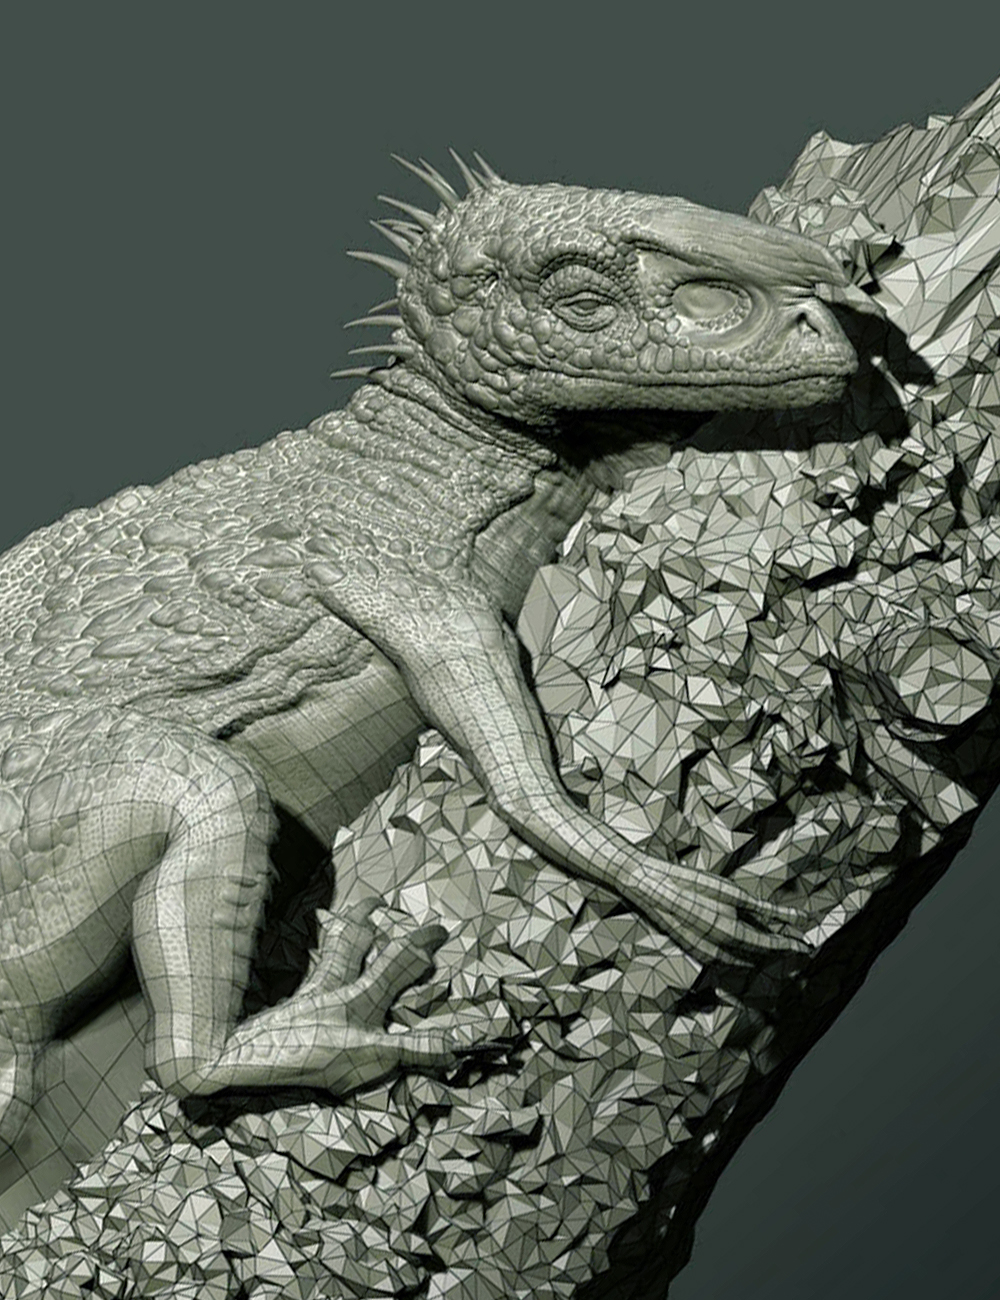 Modeling and Sculpting a Dinosaur by: FlippedNormals, 3D Models by Daz 3D